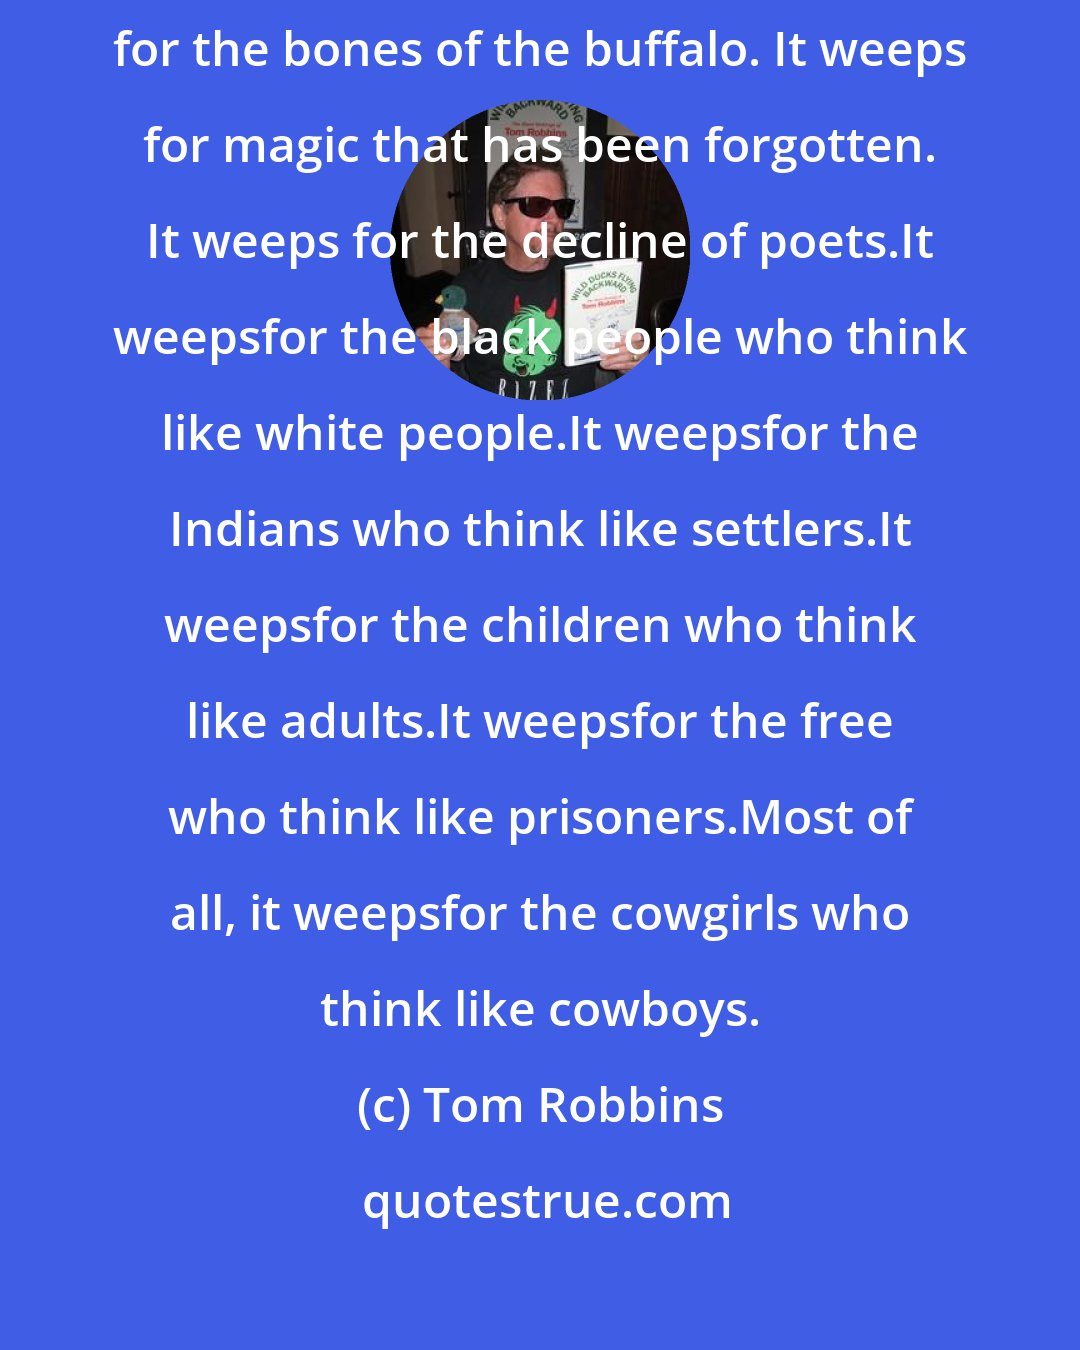 Tom Robbins: It is as if the soul of the continent is weeping. Why does it weep? It weeps for the bones of the buffalo. It weeps for magic that has been forgotten. It weeps for the decline of poets.It weepsfor the black people who think like white people.It weepsfor the Indians who think like settlers.It weepsfor the children who think like adults.It weepsfor the free who think like prisoners.Most of all, it weepsfor the cowgirls who think like cowboys.